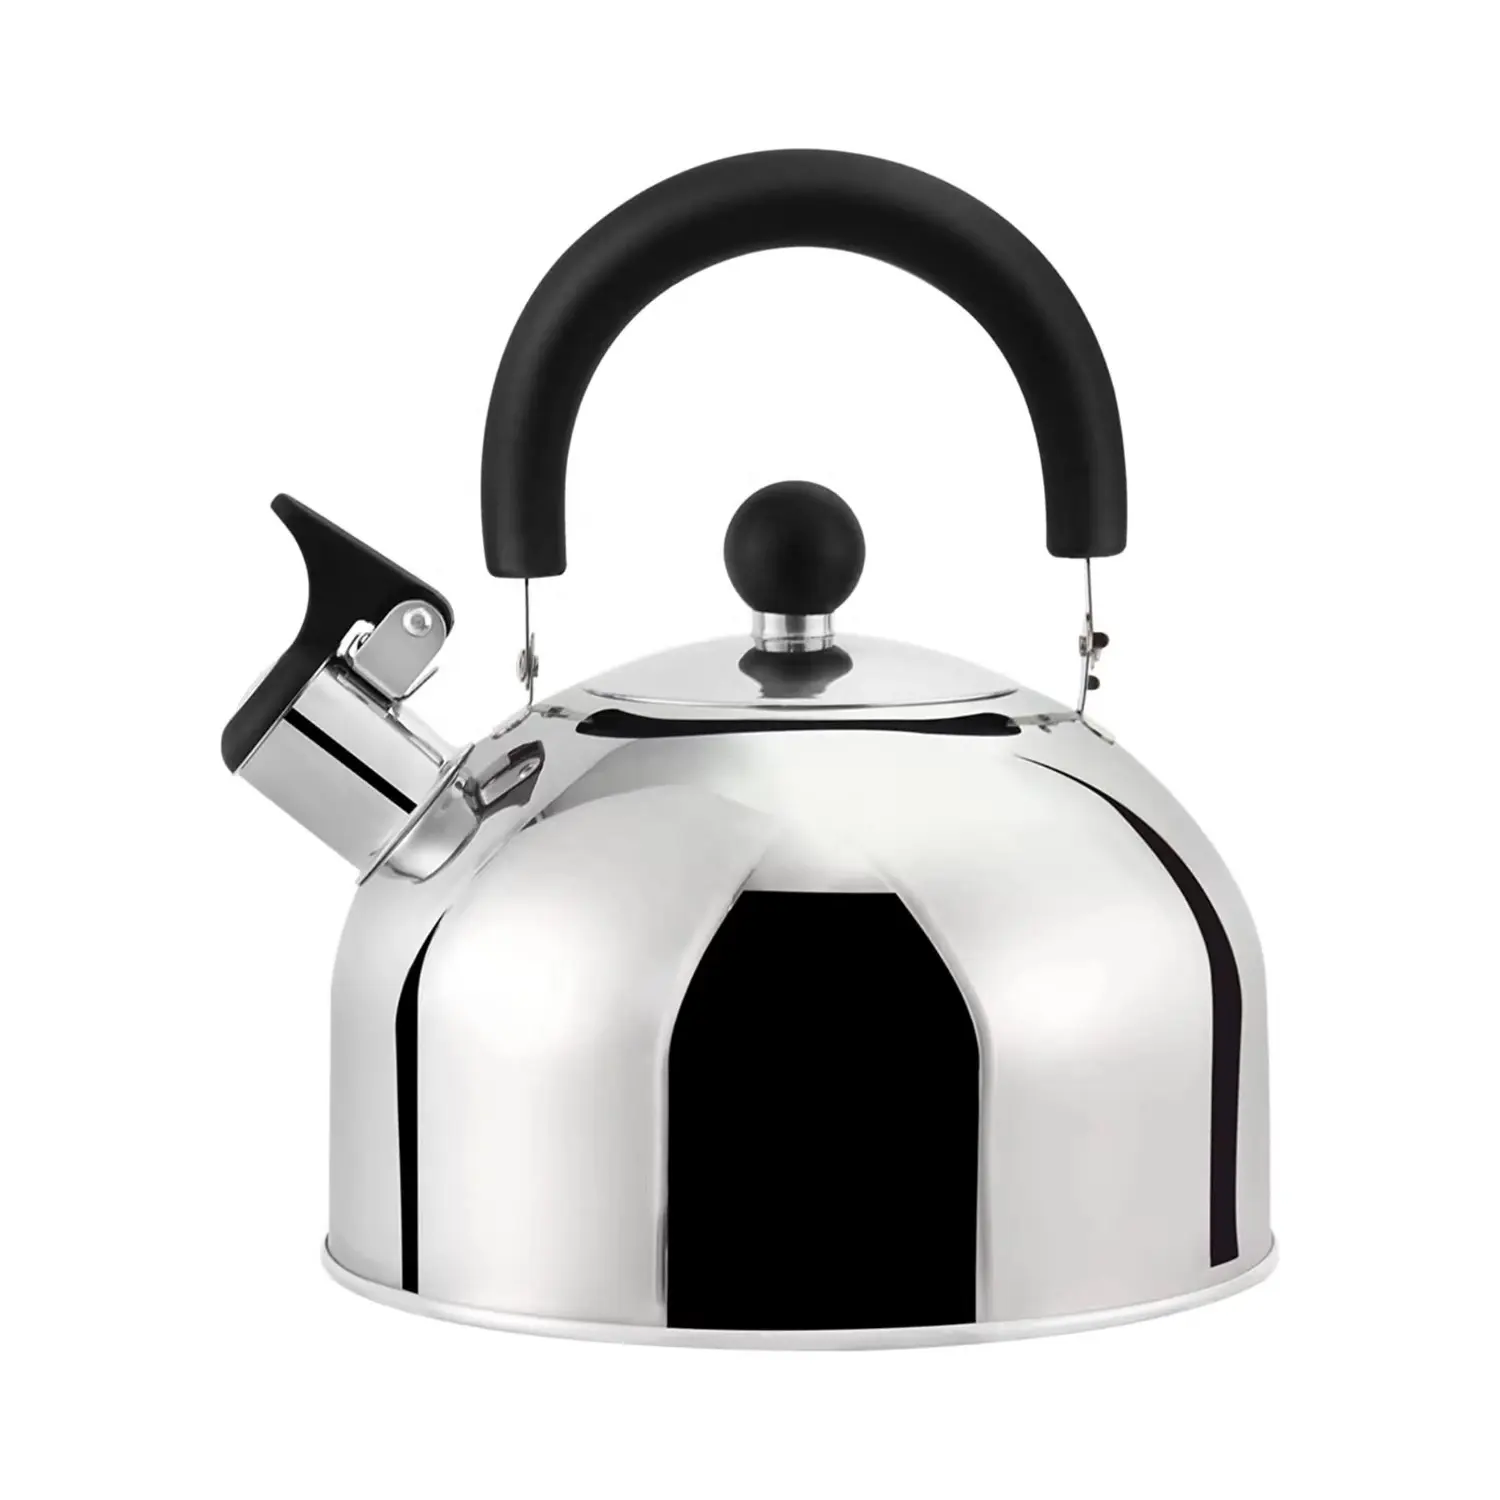 Hausroland New design stainless steel 3.0L water kettle tea kettle whistling Hot Water Kettle for home kitchen